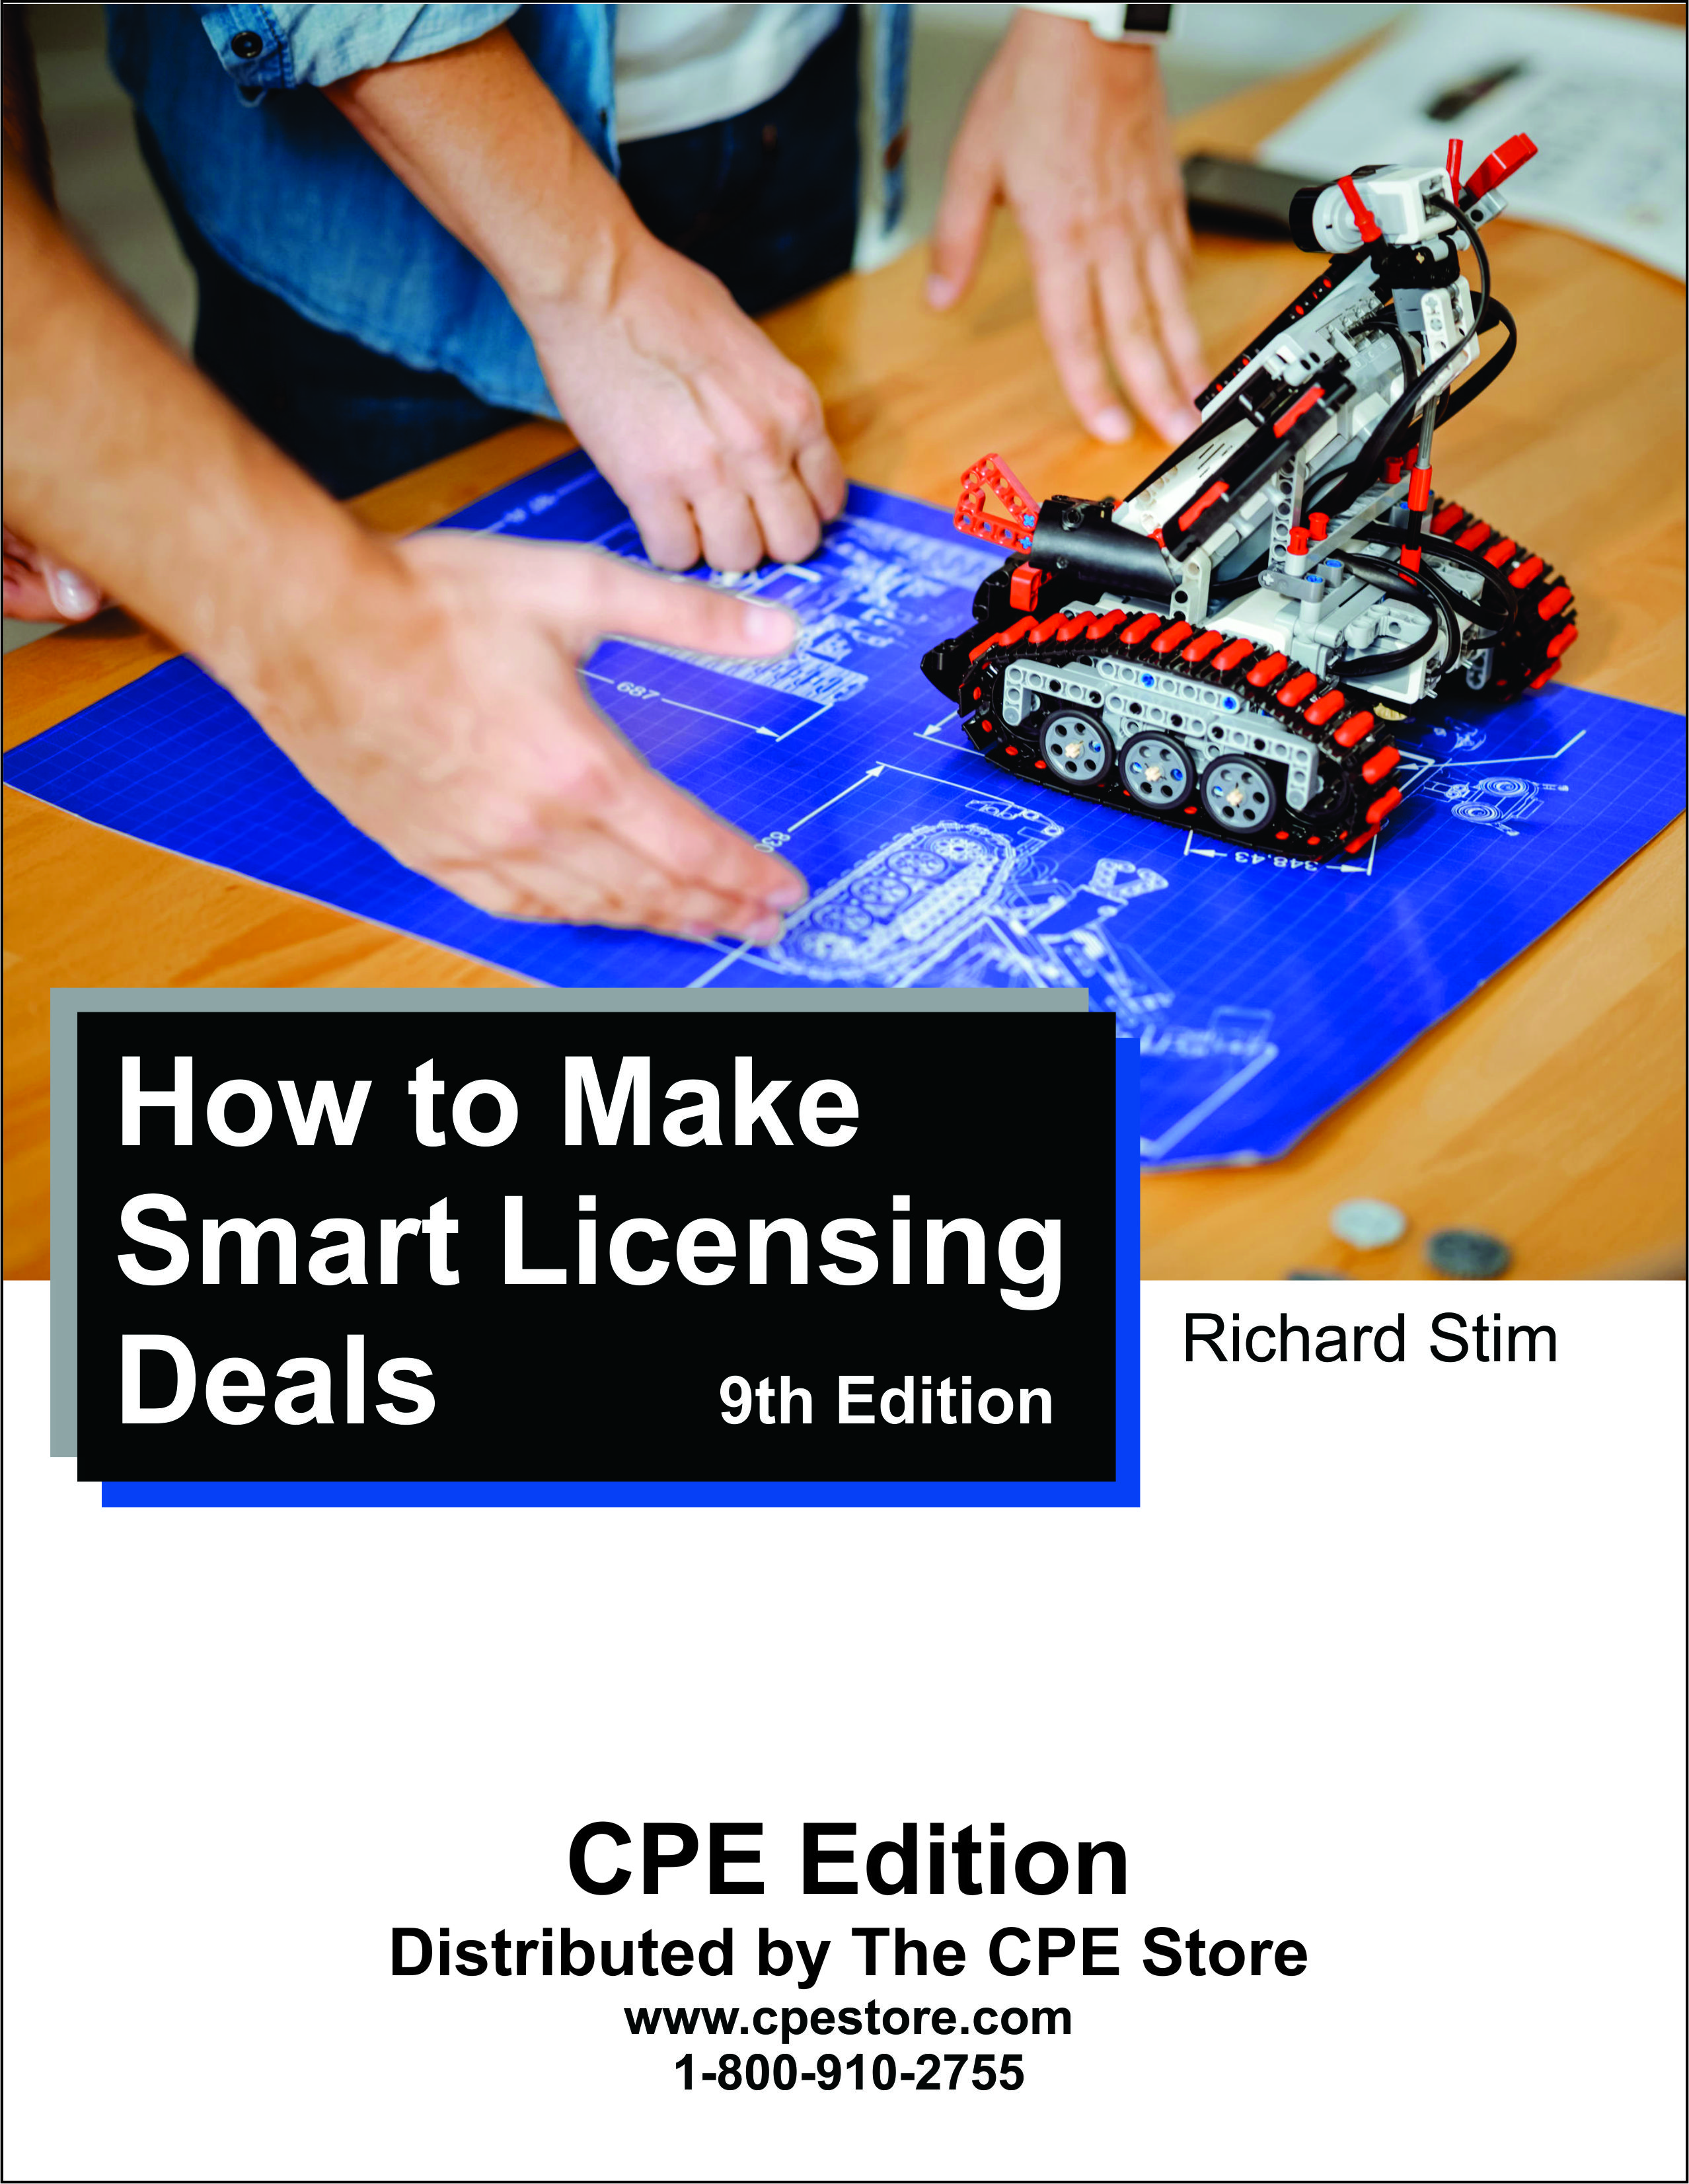 How to Make Smart Licensing Deals